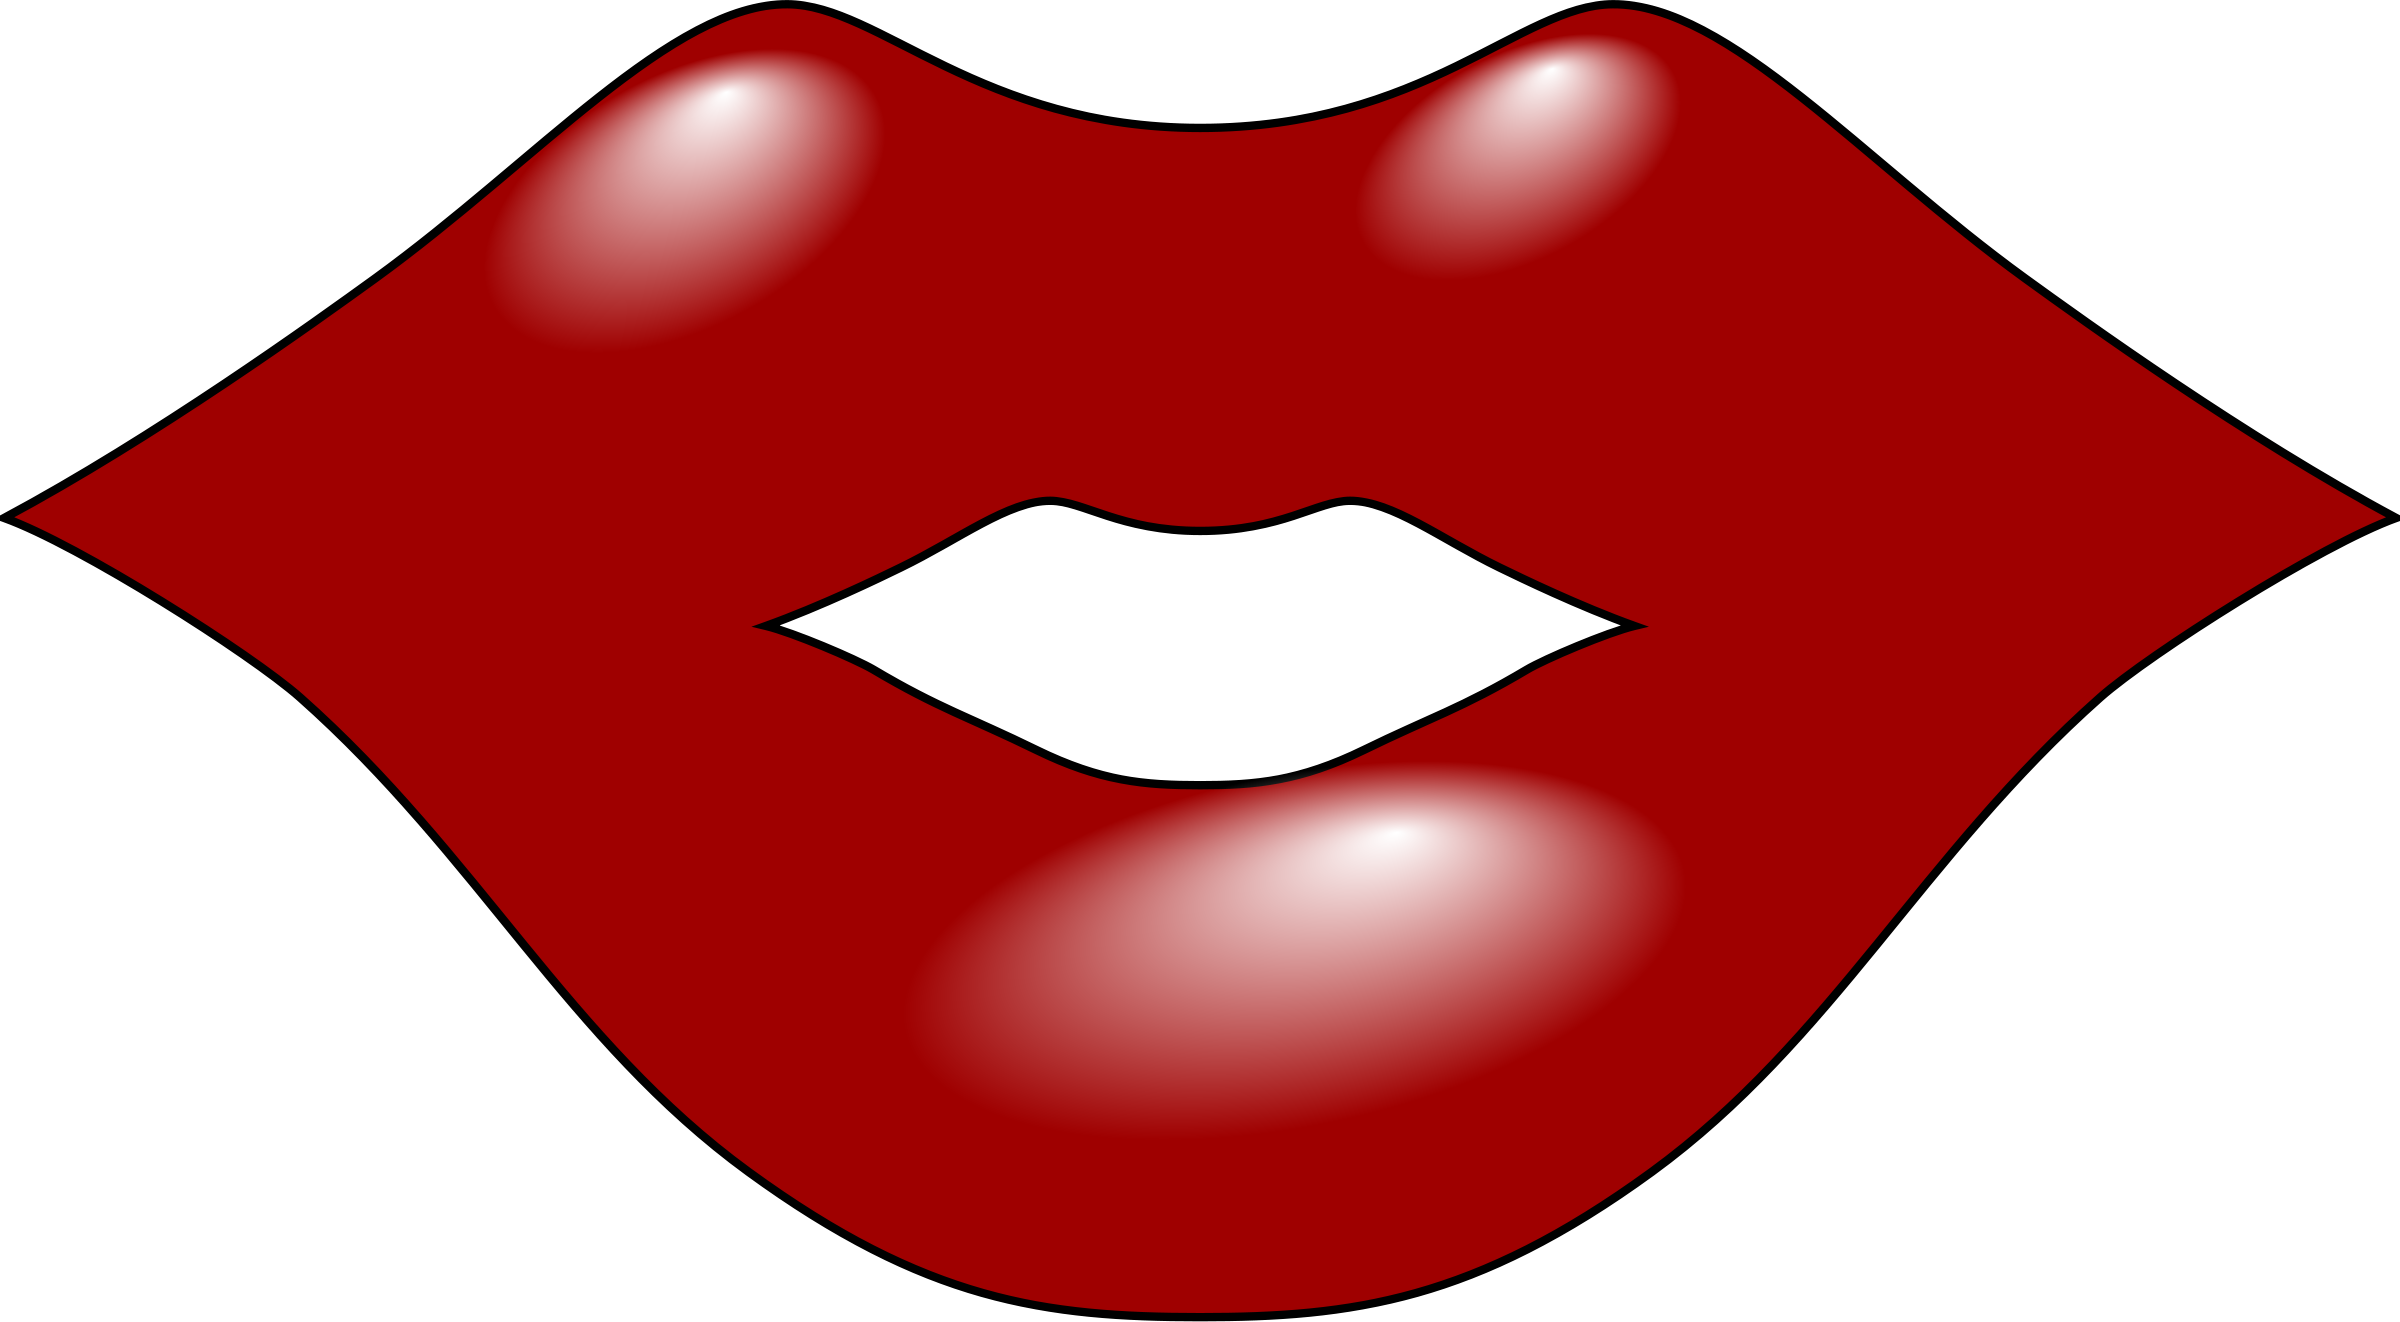 Mouth clipart photo.